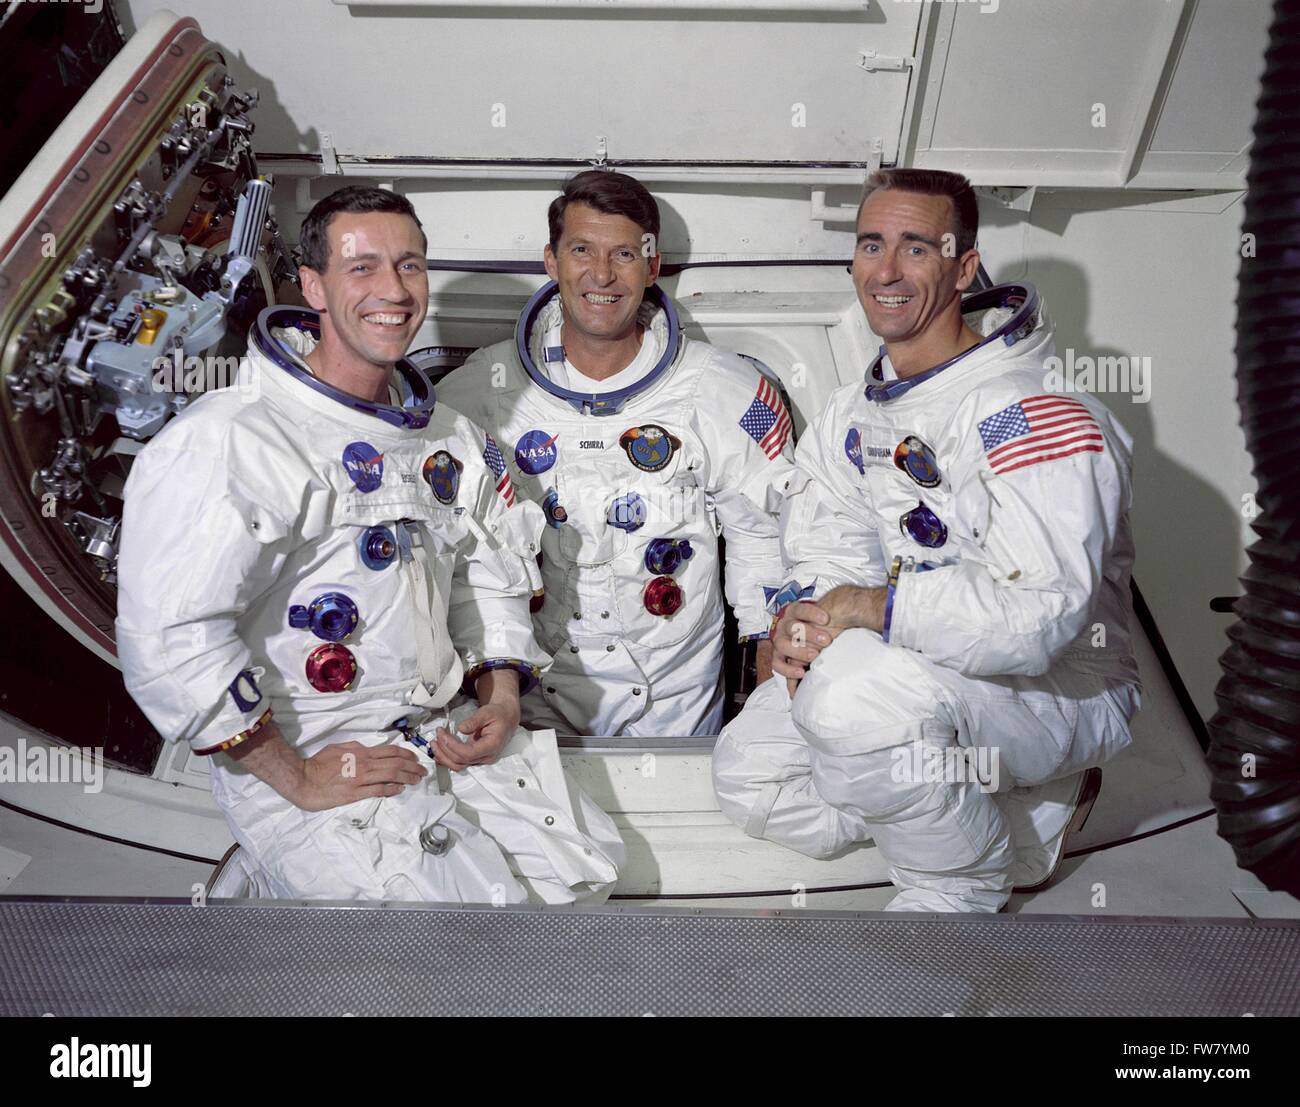 Prime crew of the first manned Apollo space mission together in their spacesuits inside the White Room standing in the space capsule hatch May 22, 1968 in Cape Canaveral, Florida. From left to right are: Command Module pilot, Don Eisele, Commander, Walter Schirra Jr. and Lunar Module pilot, Walter Cunningham. Stock Photo